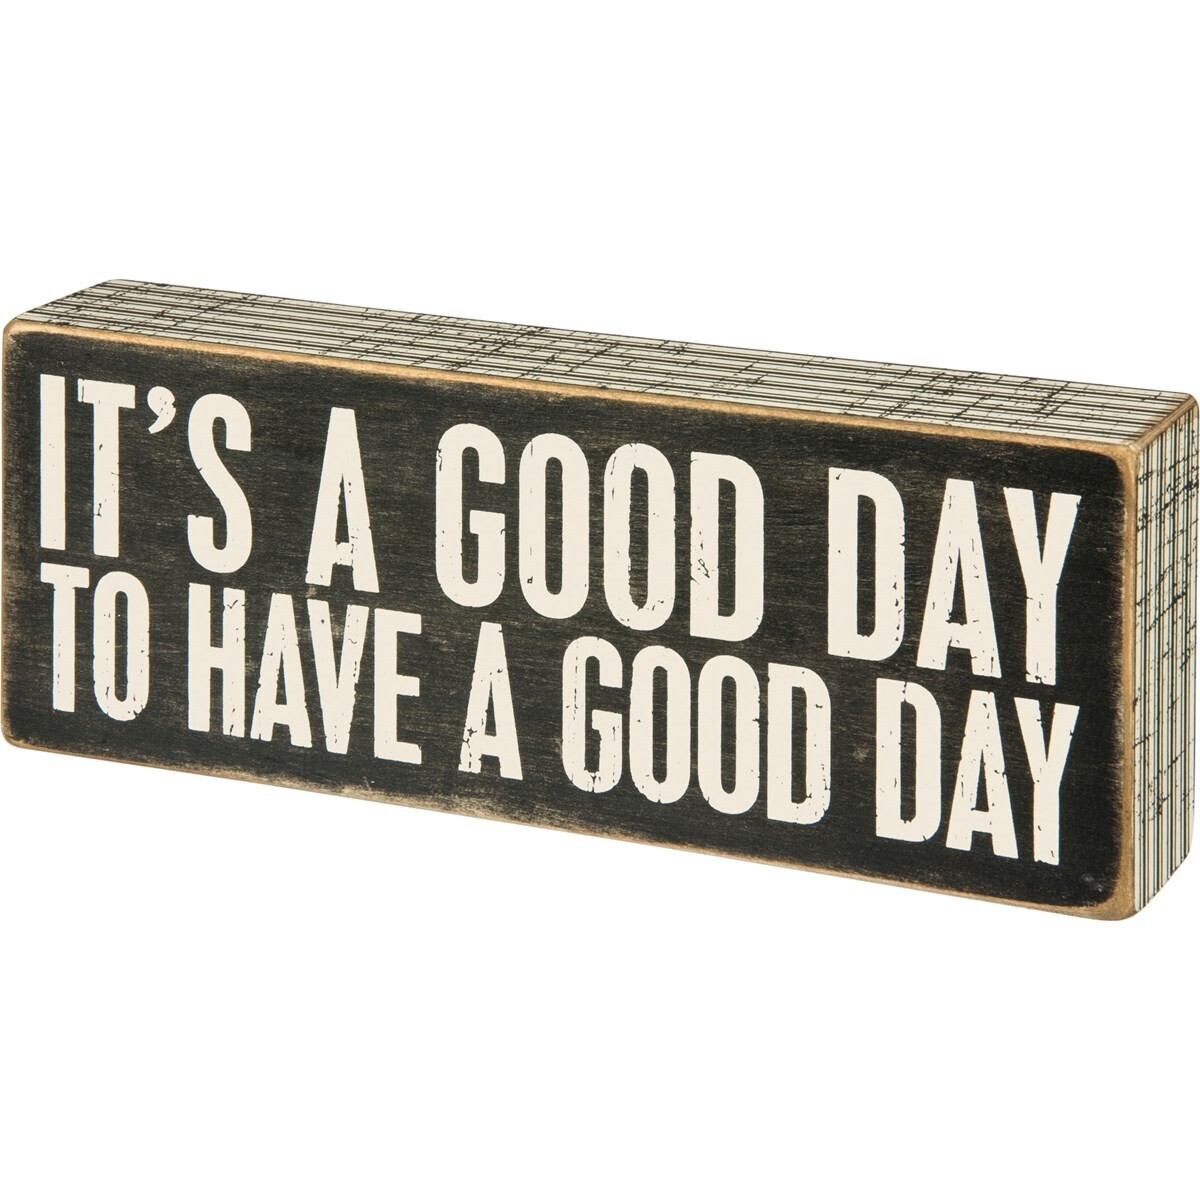 A Good Day Box Sign